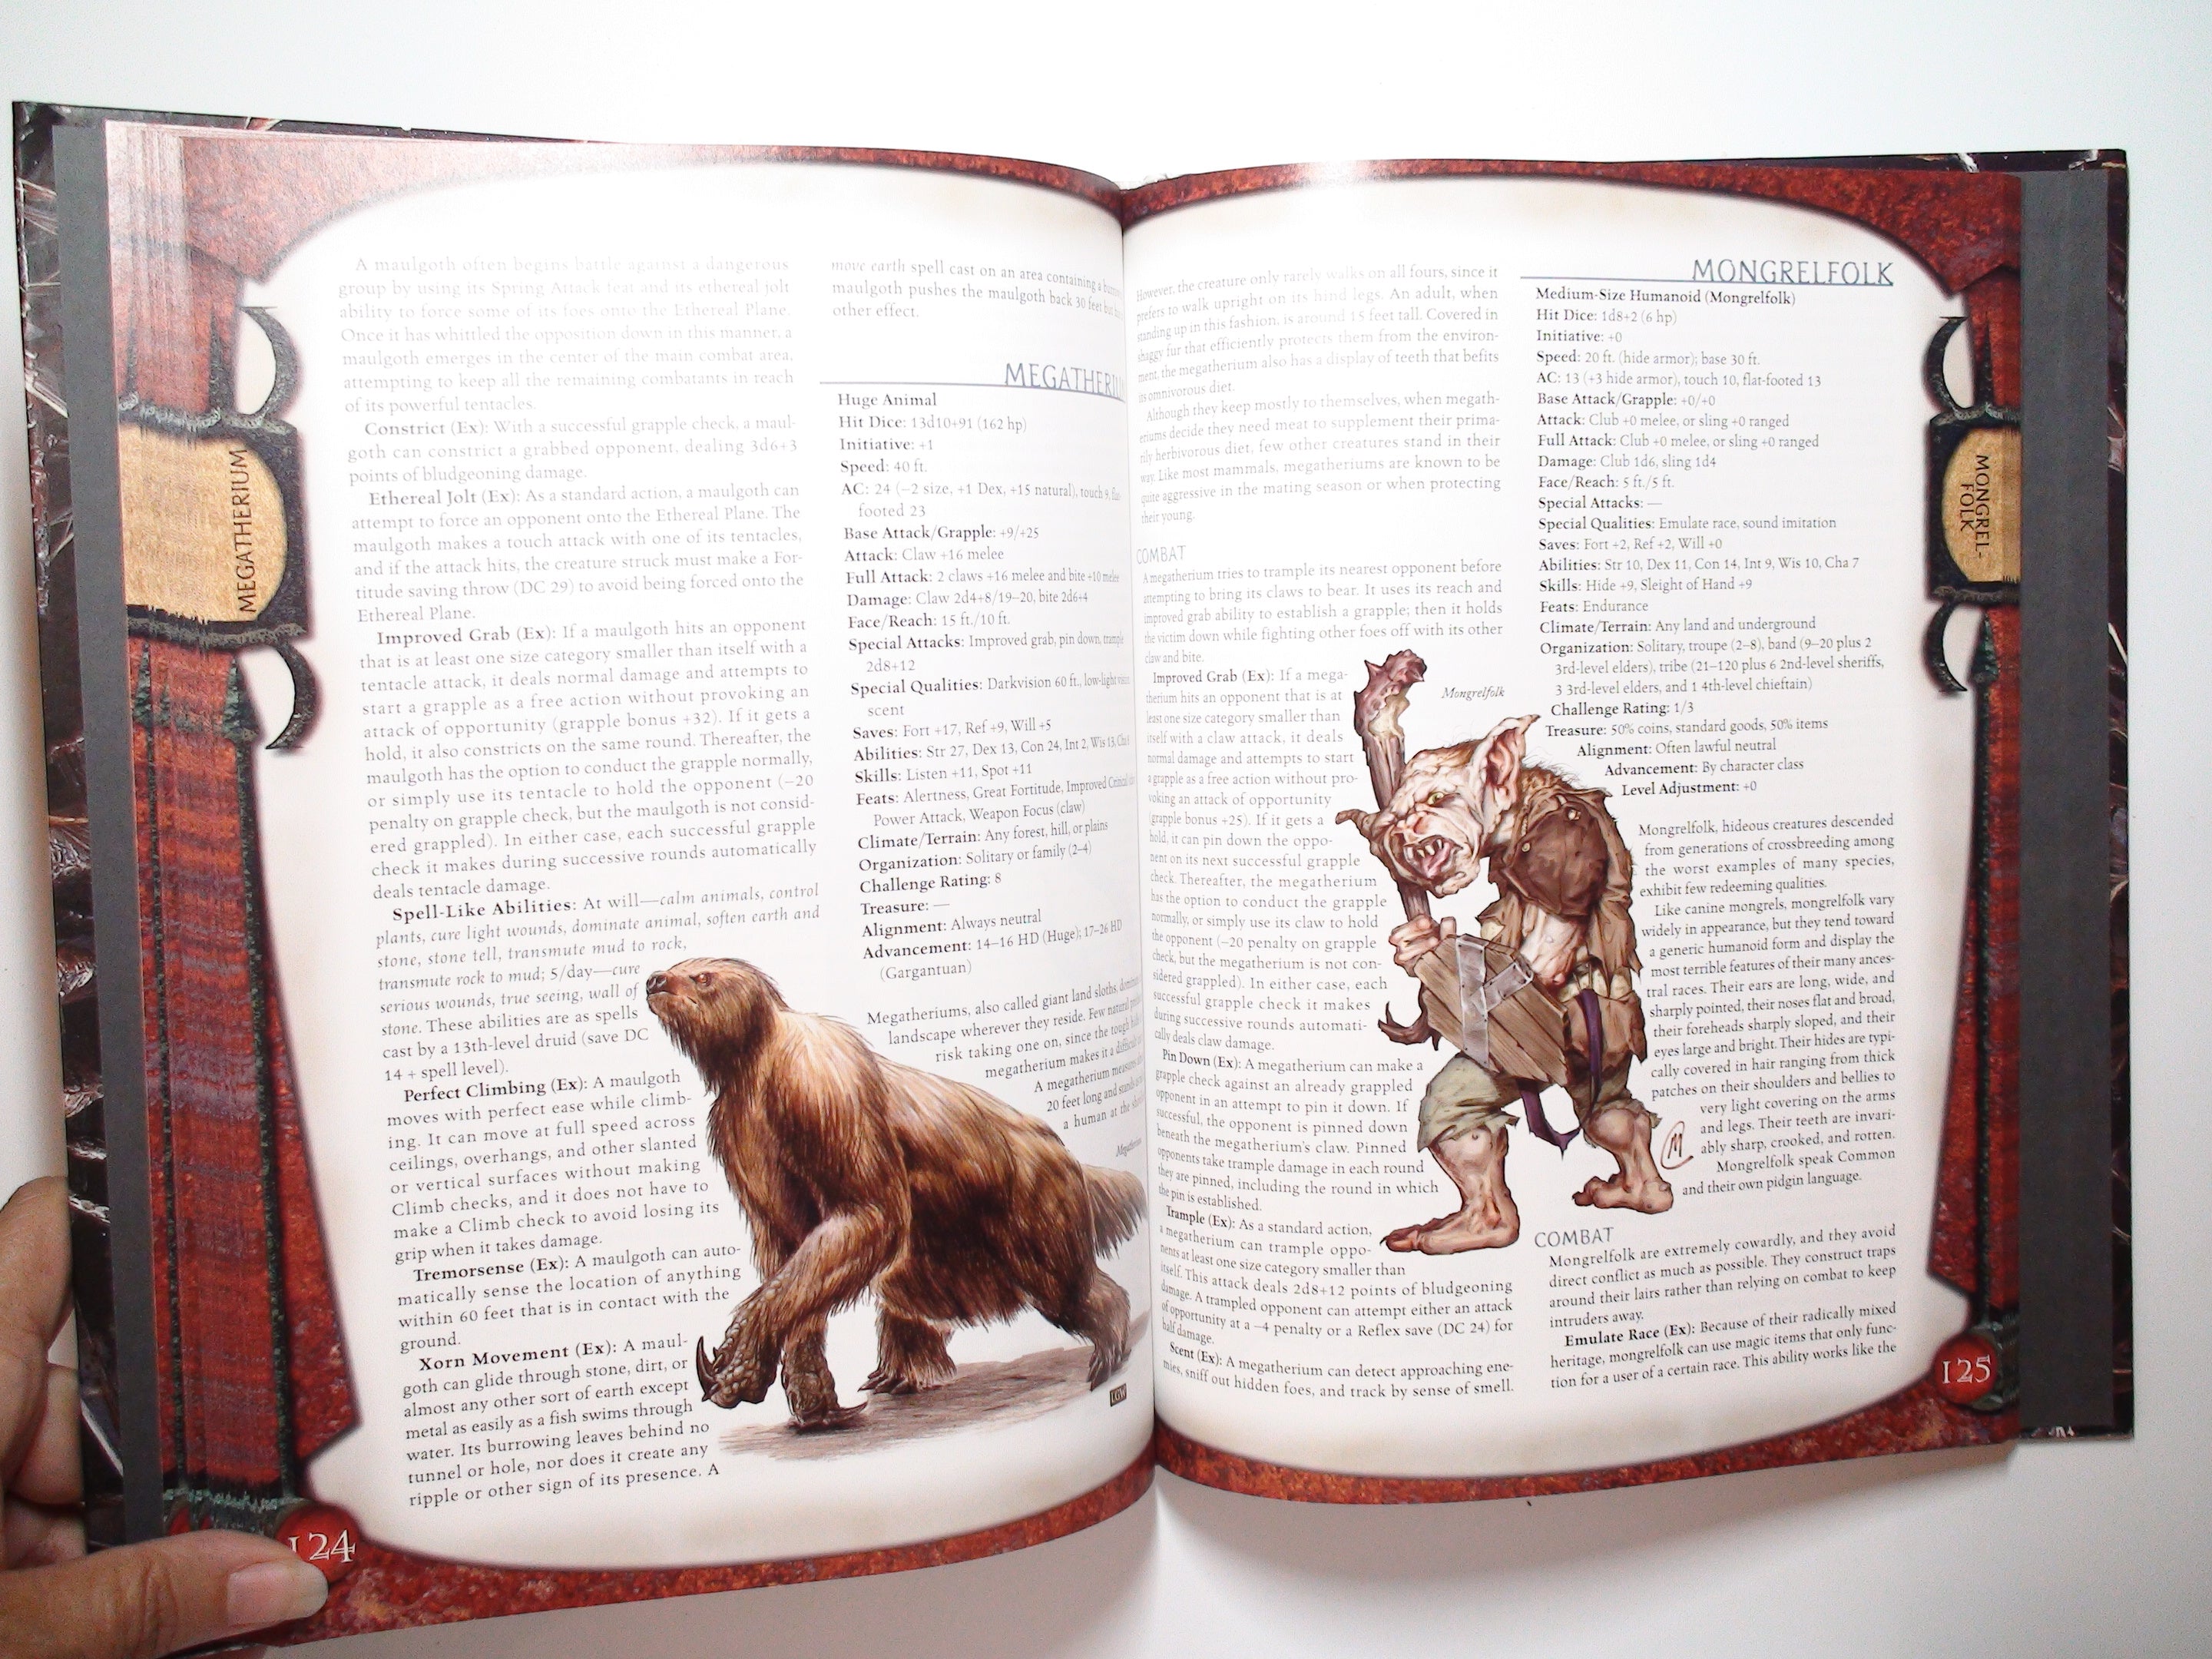 Fiend Folio, Wizzards of the Coast, Dungeons and Dragons 3.5, 1st Printing, 2003